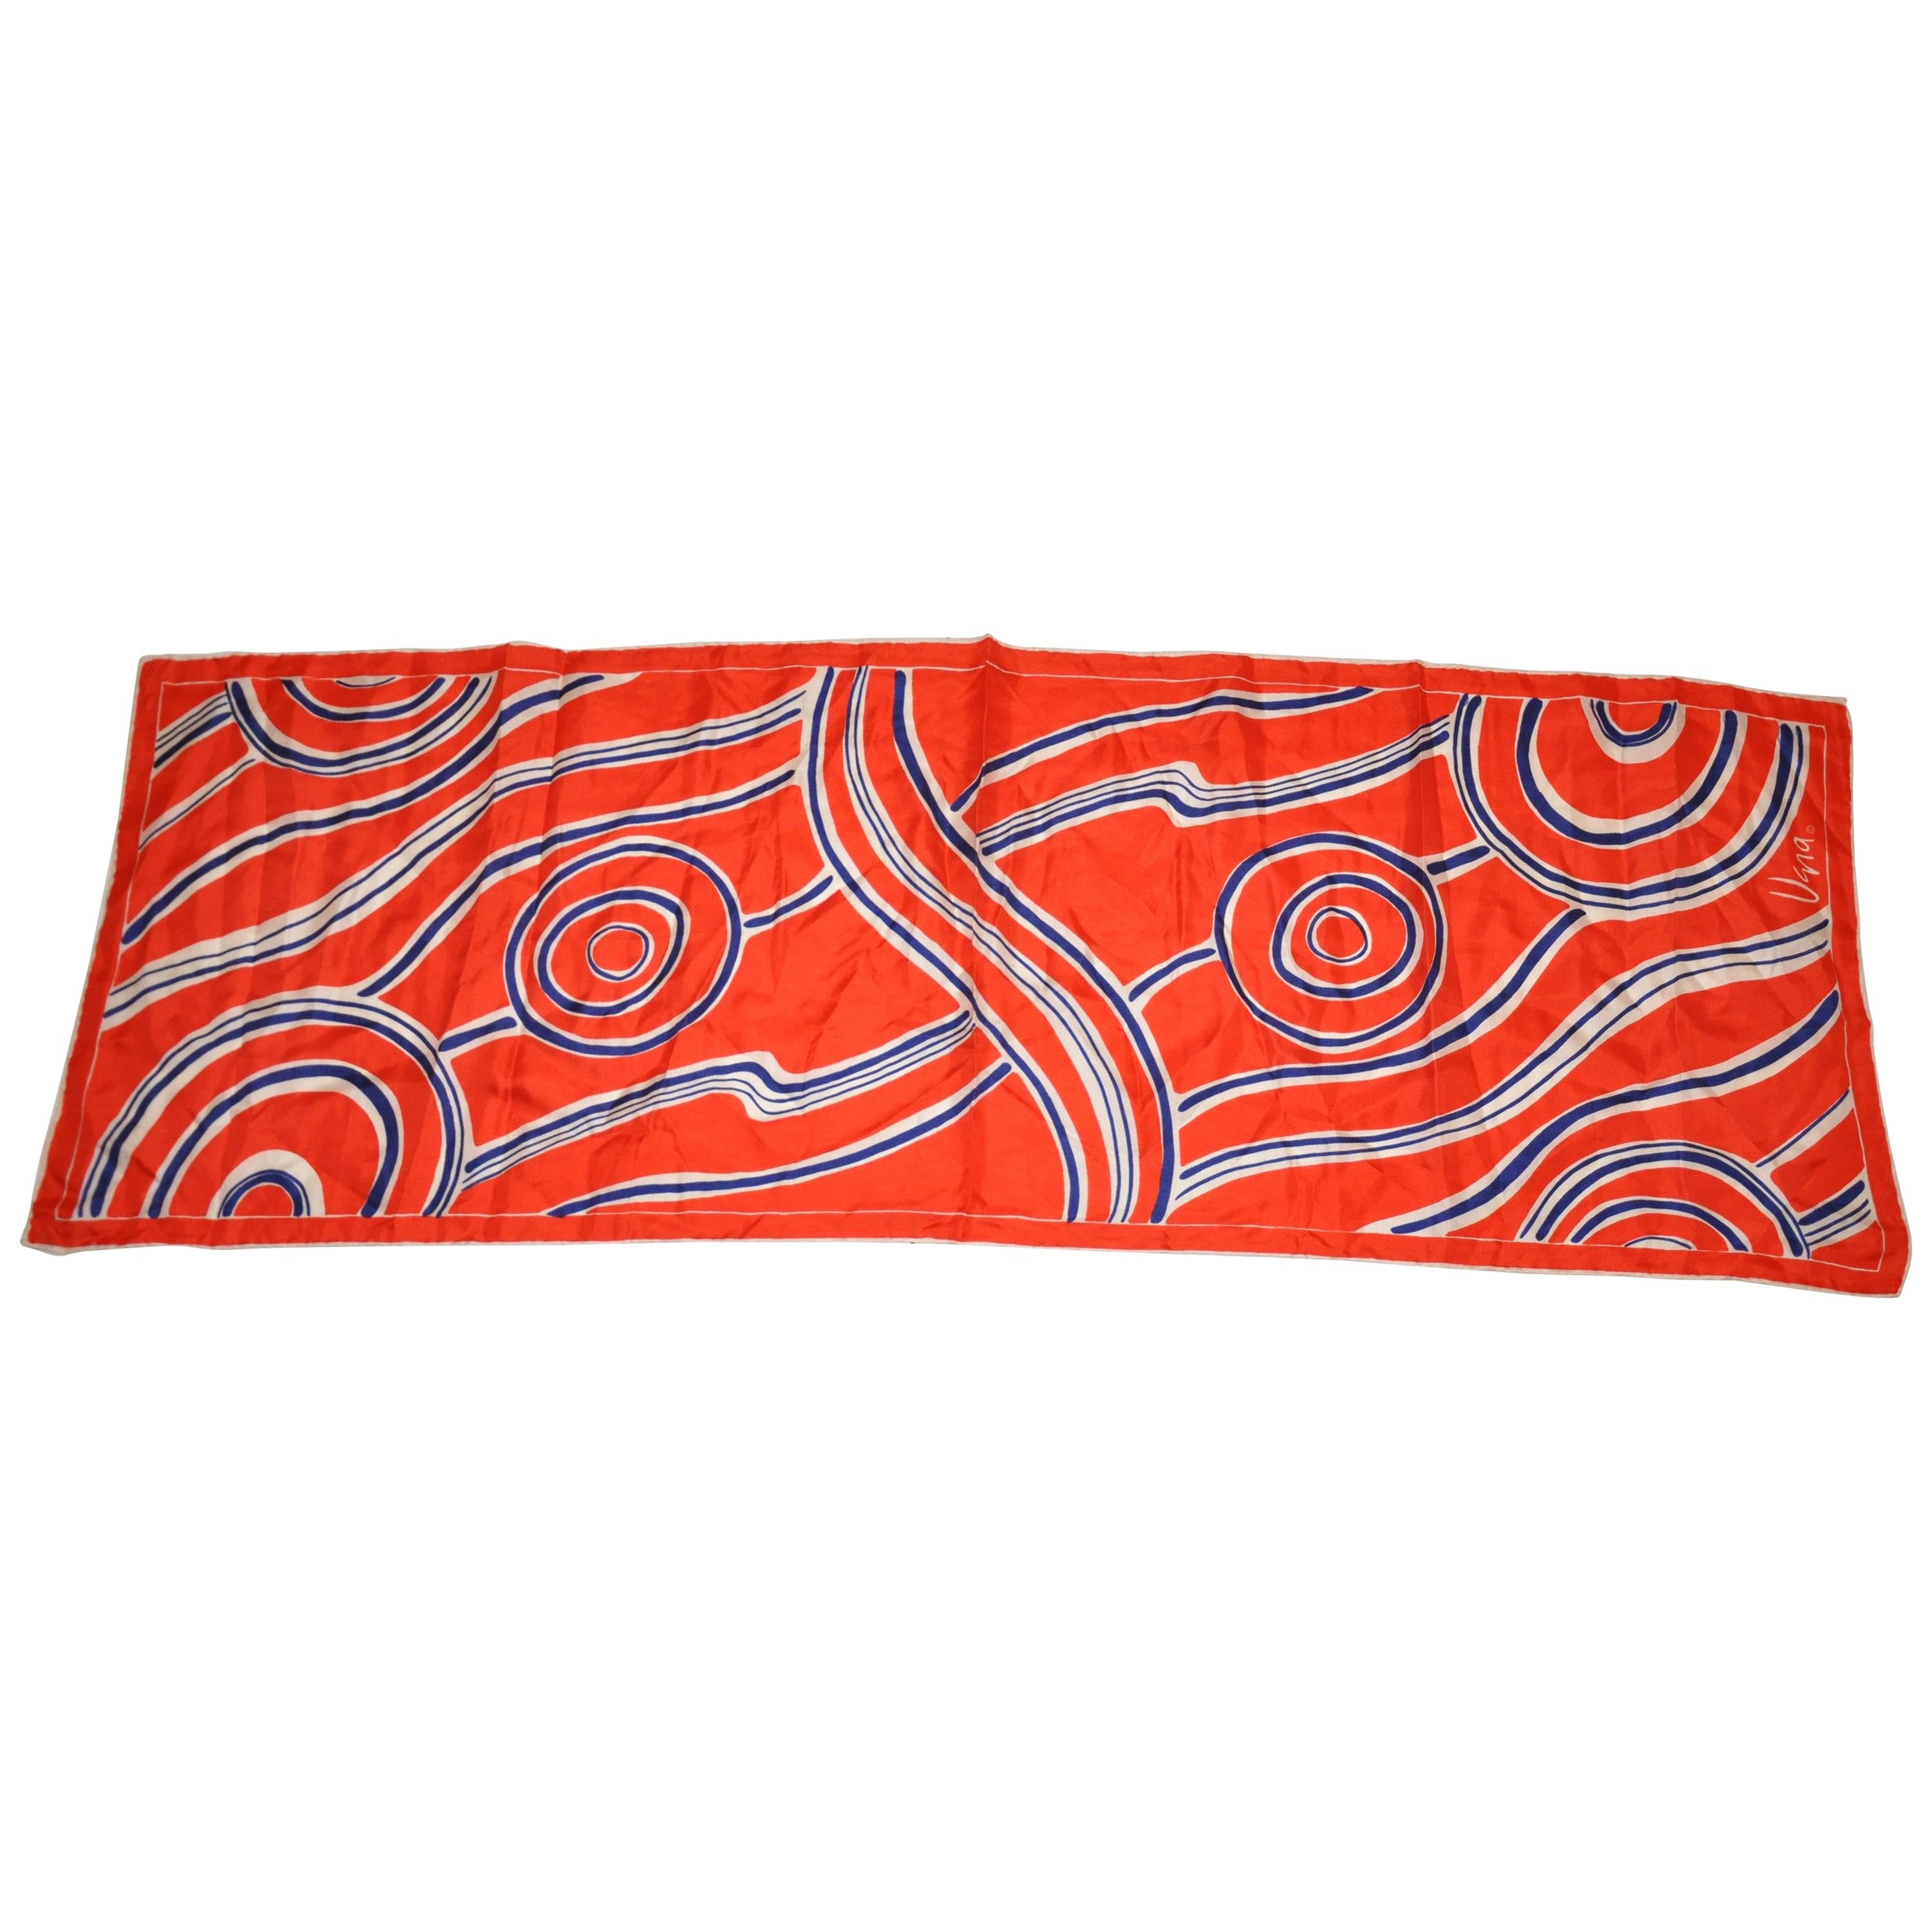 Vera Bold Red, White And Blue "Swirls" Silk Scarf For Sale